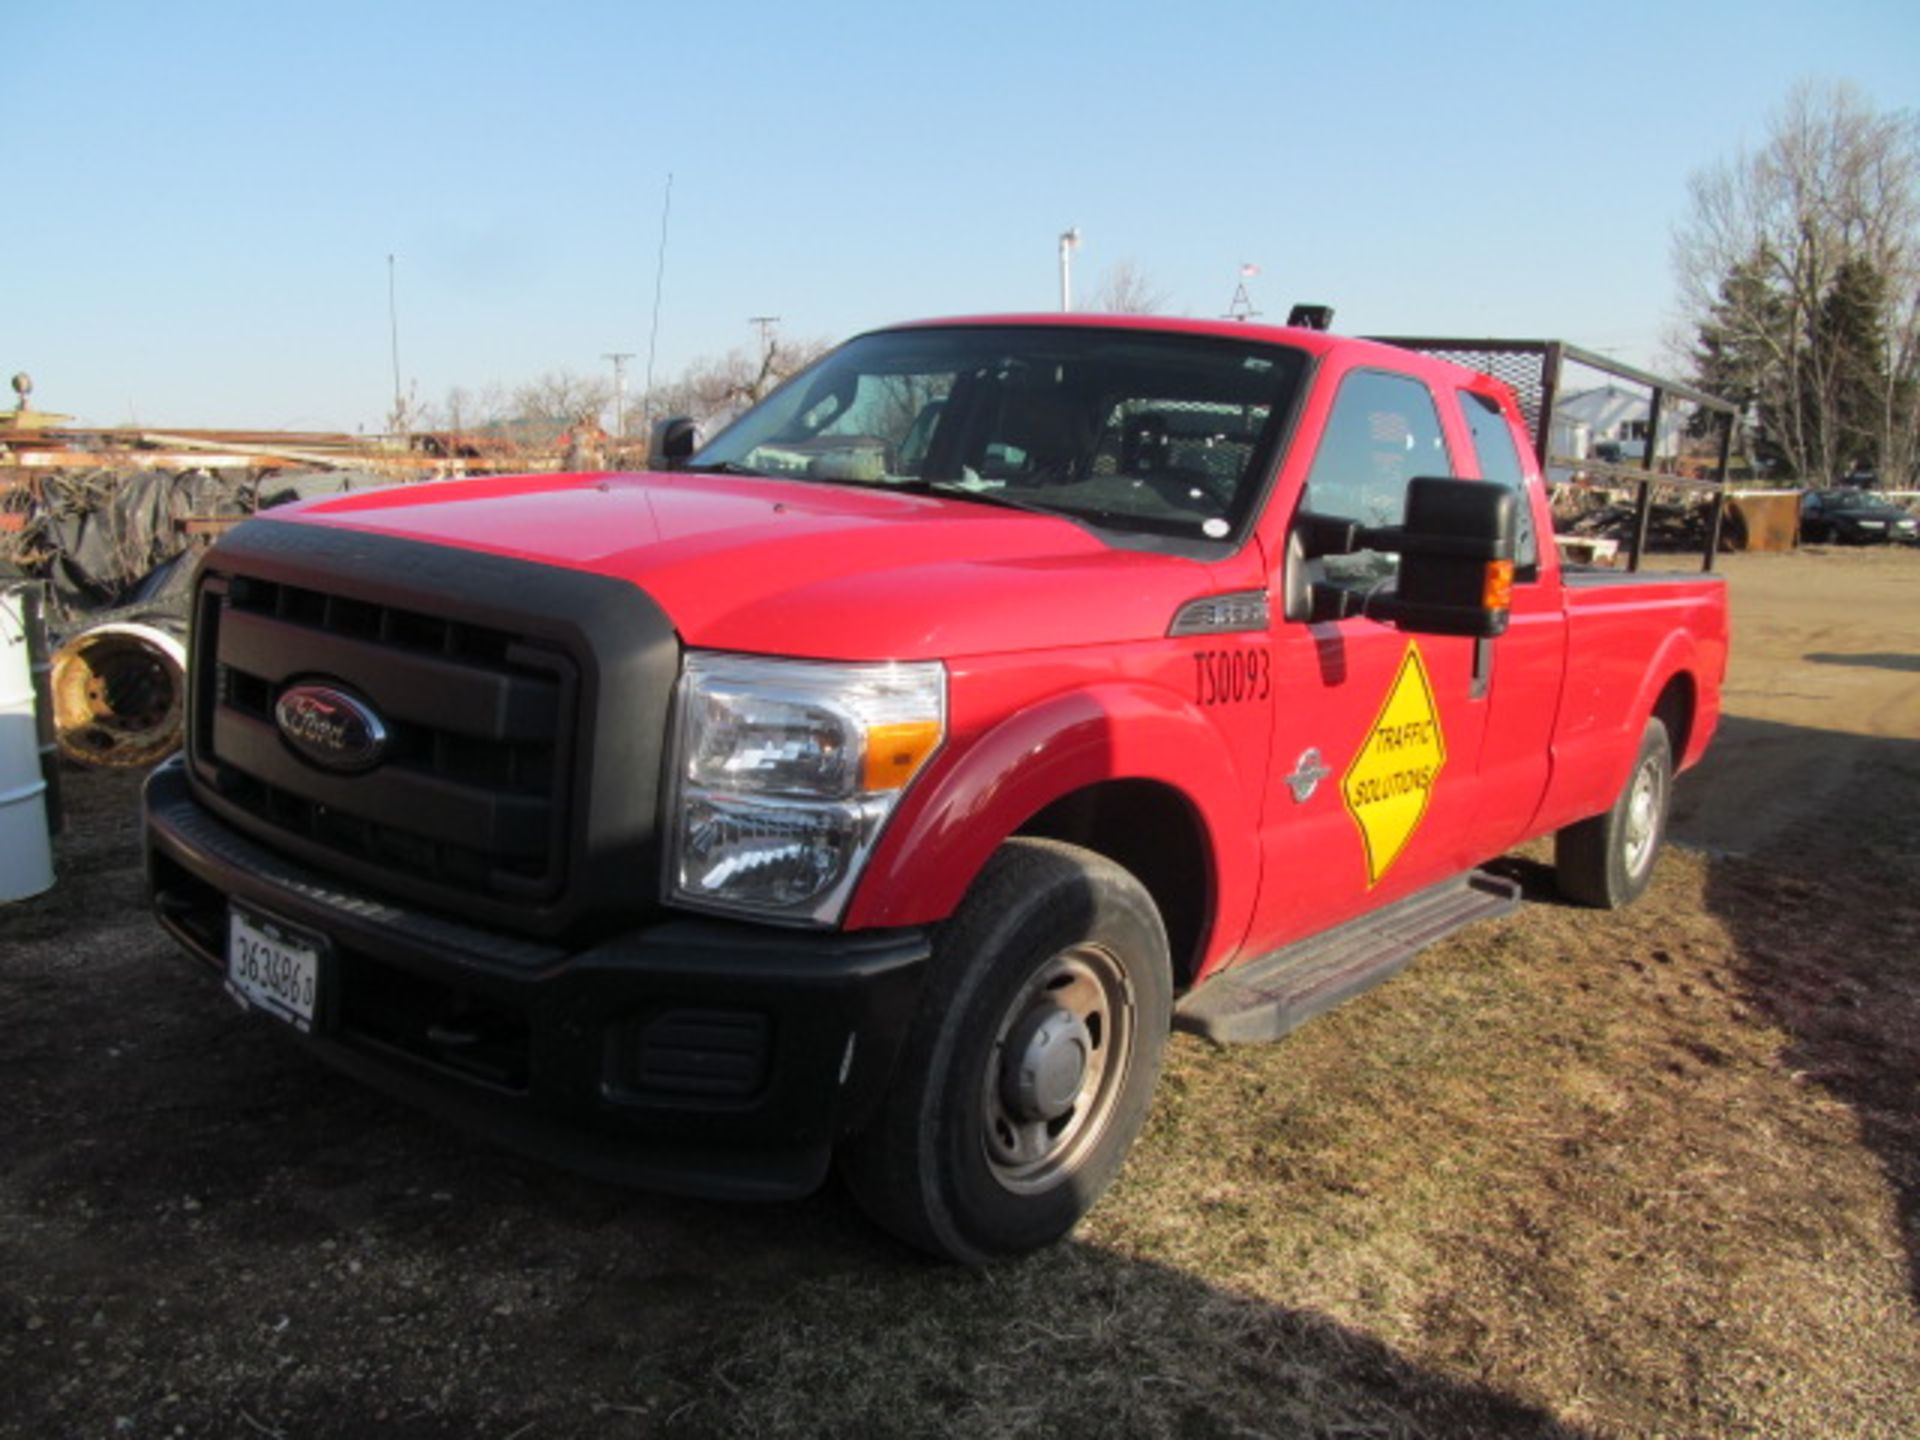 2013 Ford F350 Pickup Truck (VIN: 1FT8X3AT1EEAY7797) Estimated Mileage: 143735.0] (Subject To - Image 2 of 4